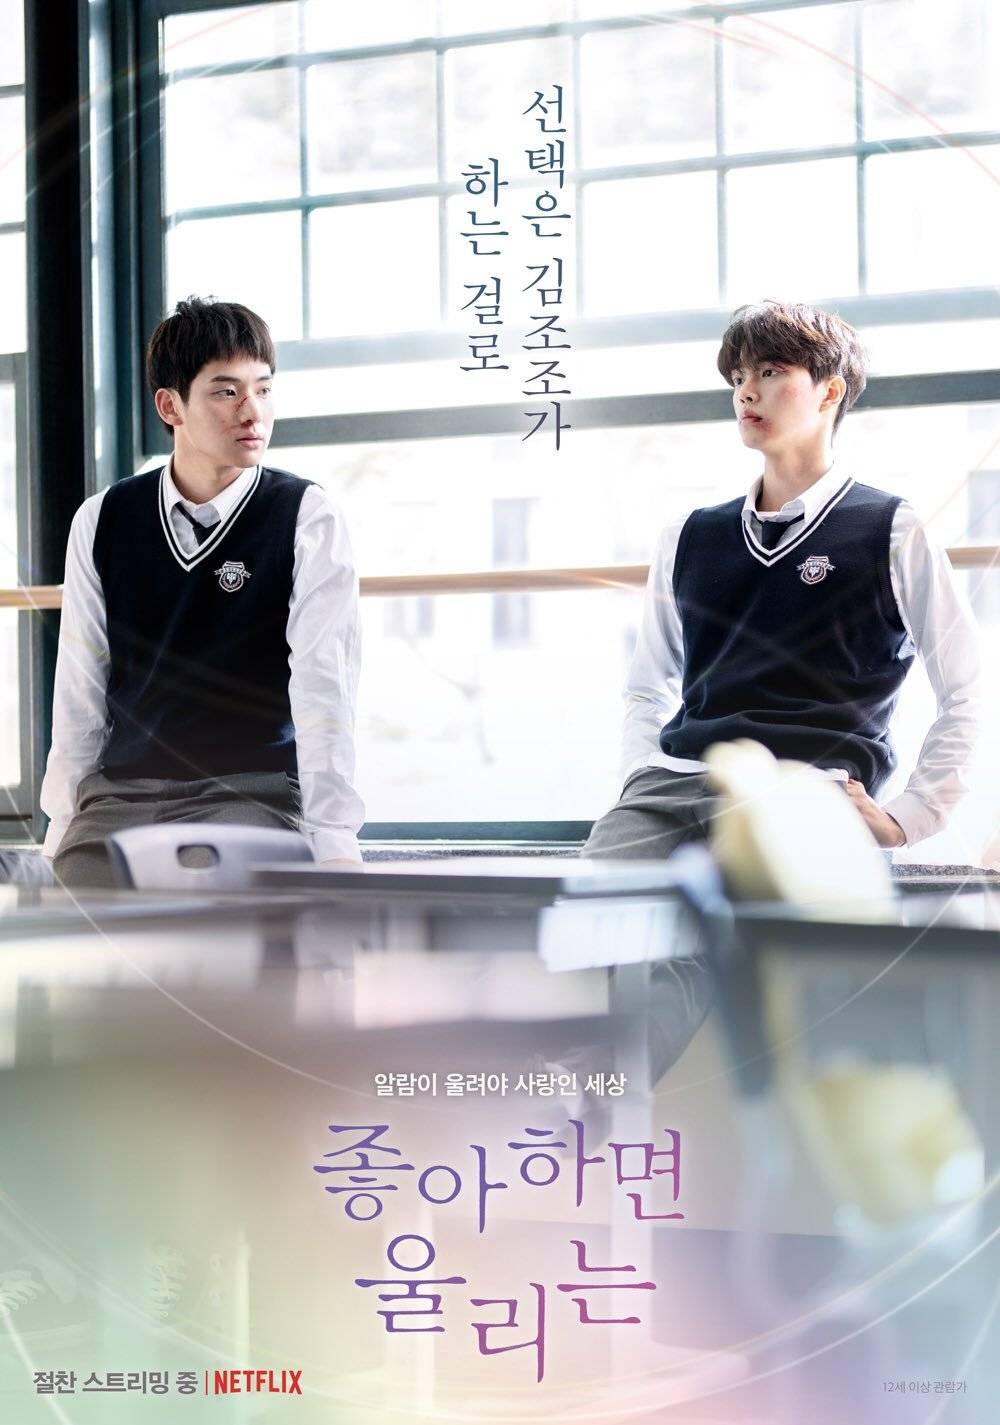 [Photos] New Posters Added for the Korean Drama 